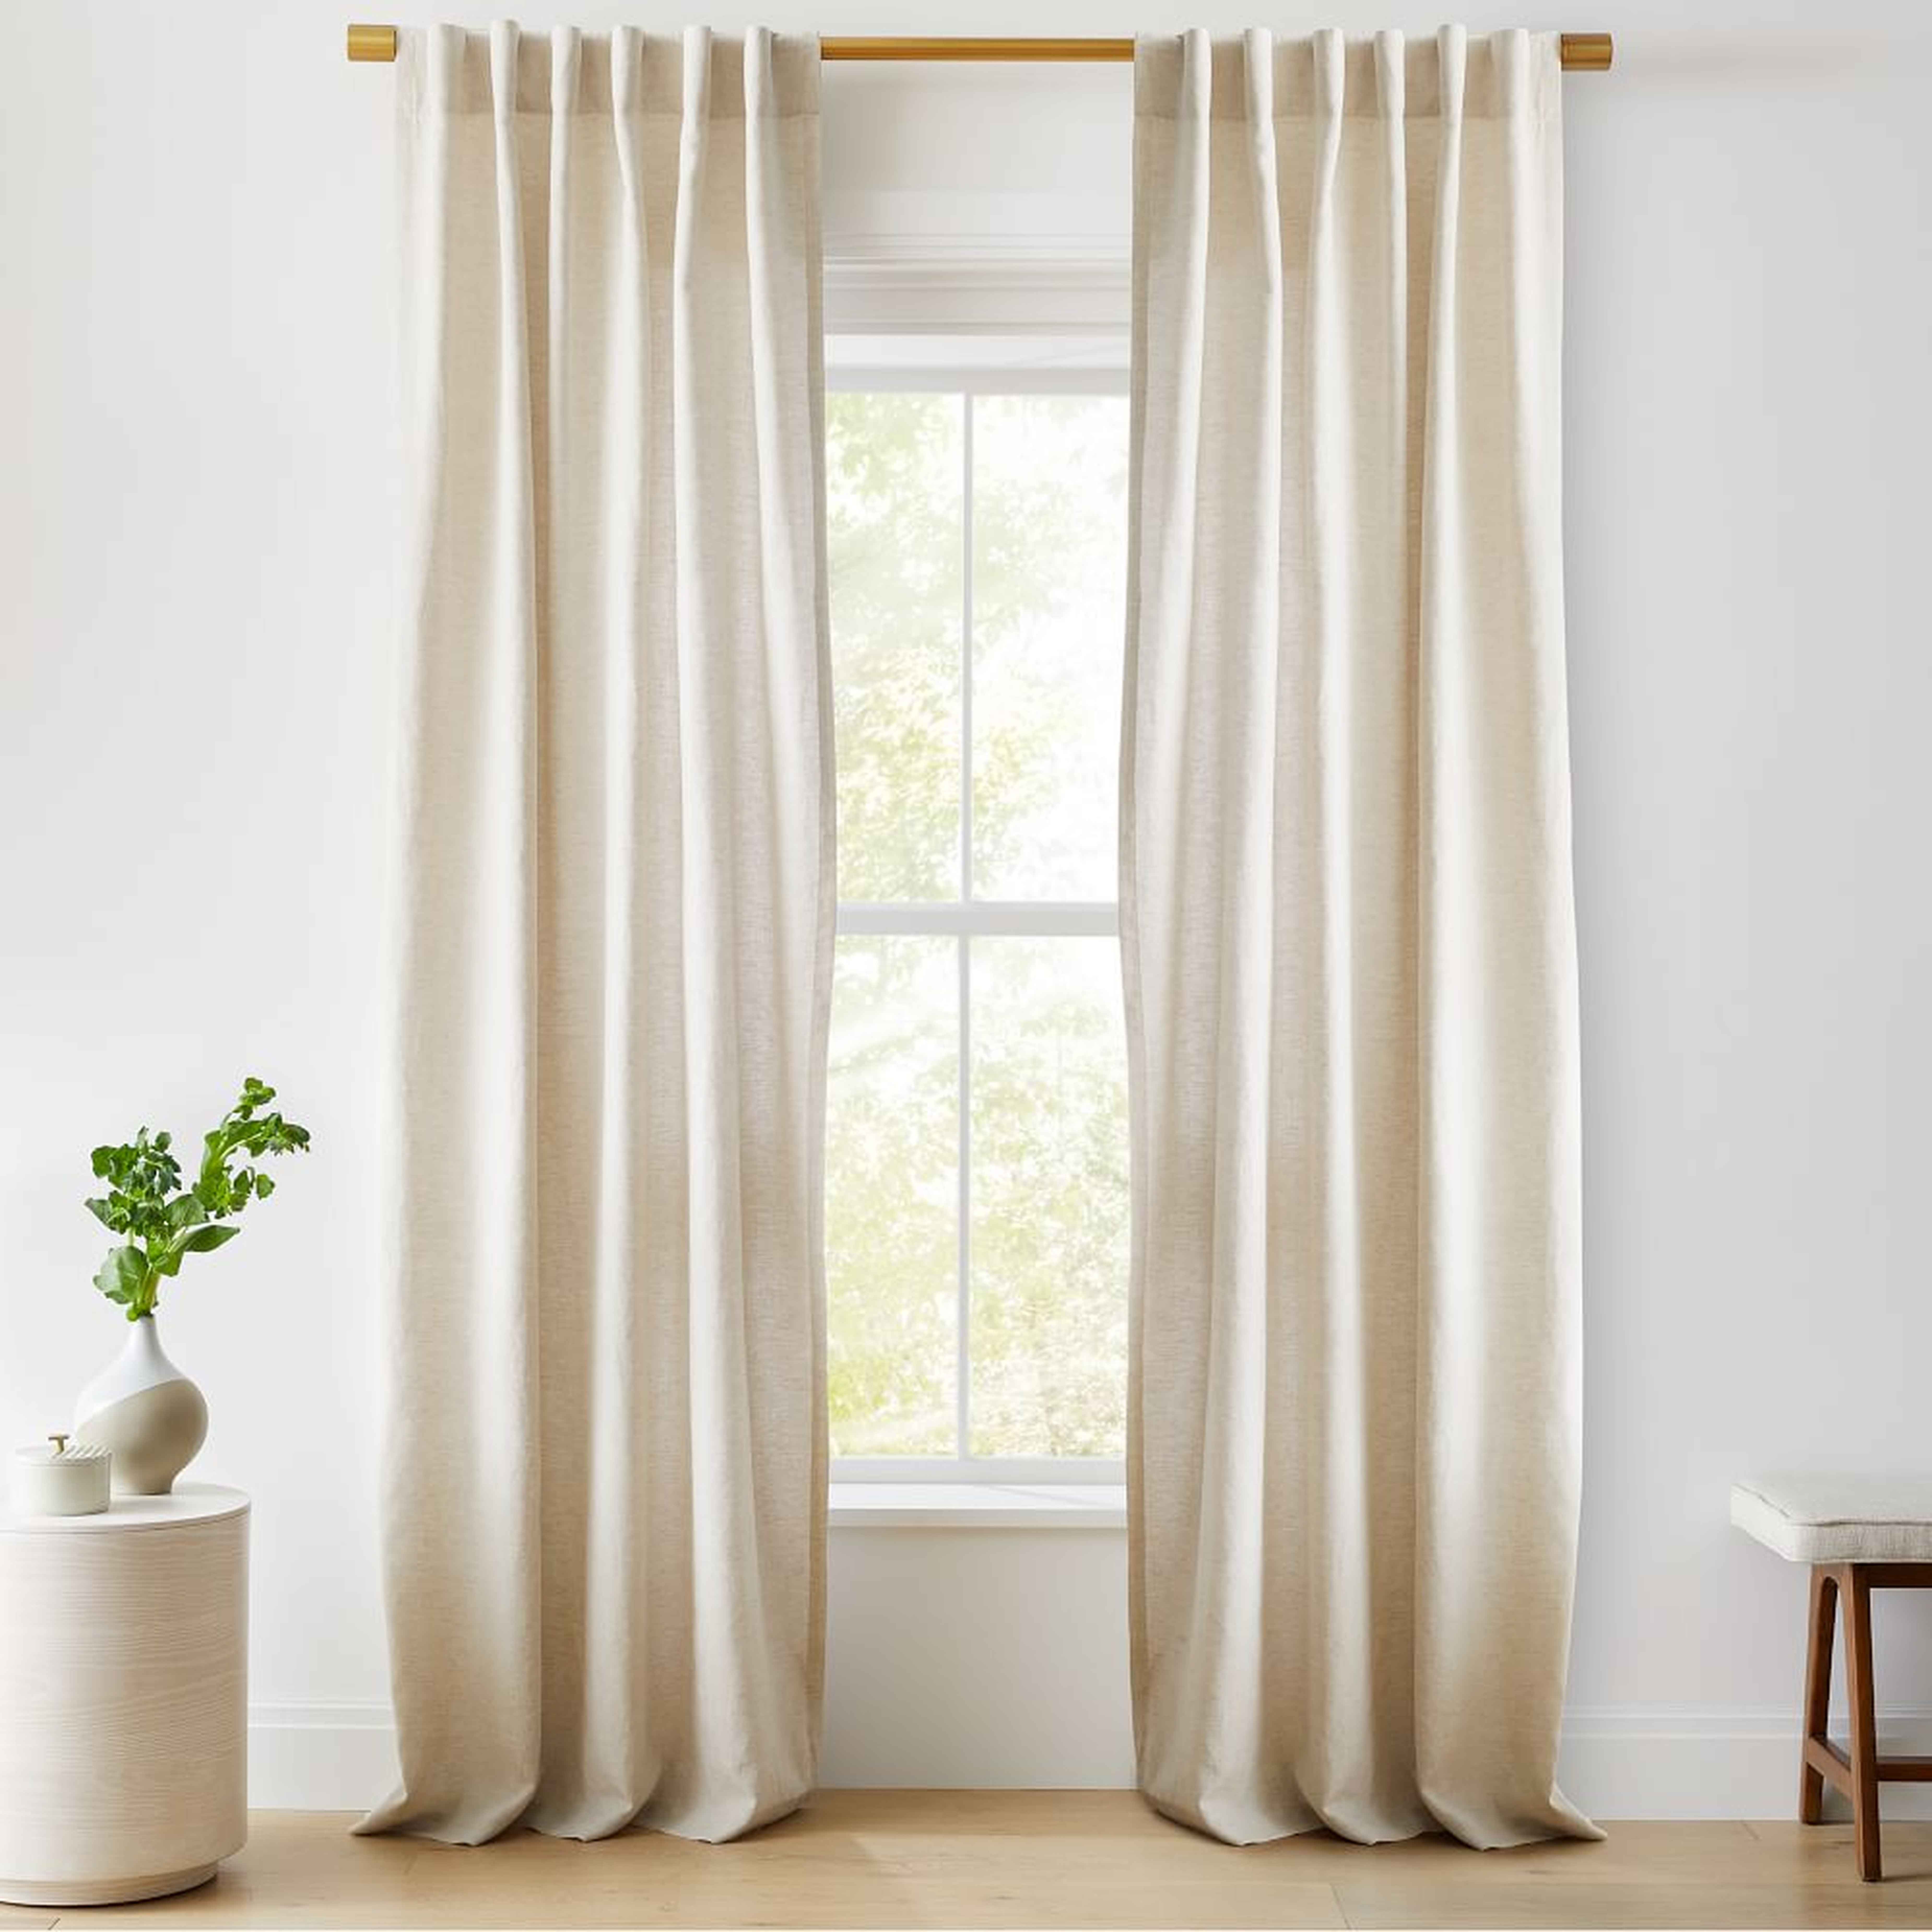 European Flax Linen Curtain with Blackout Lining, Natural, 48"x108" - West Elm